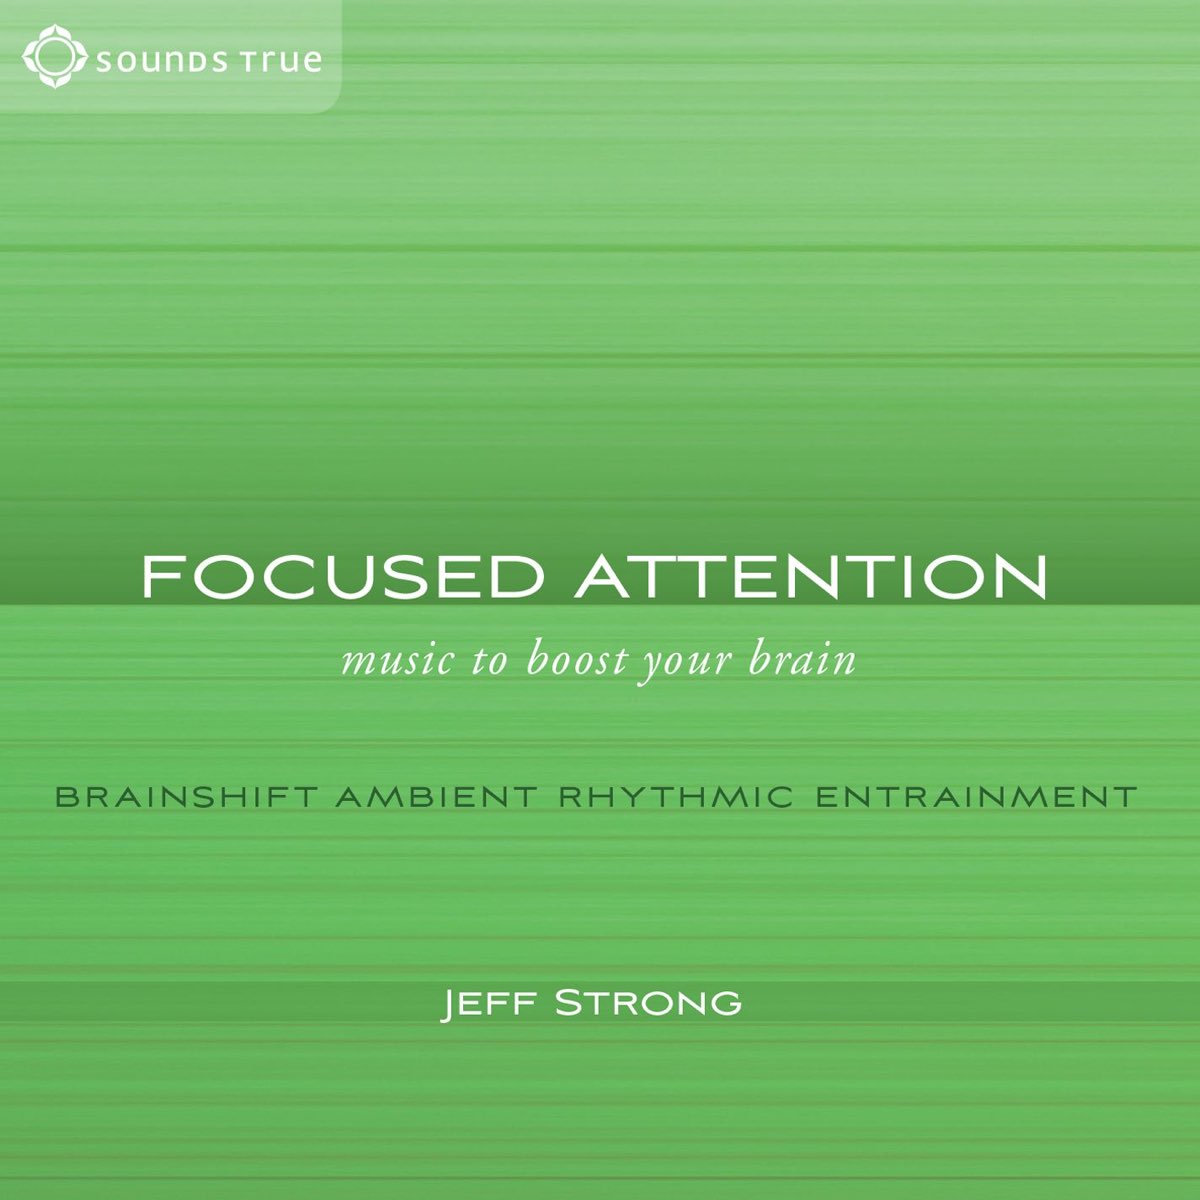 Focused attention. Focus attention. Focus your attention. Jeff stronger.